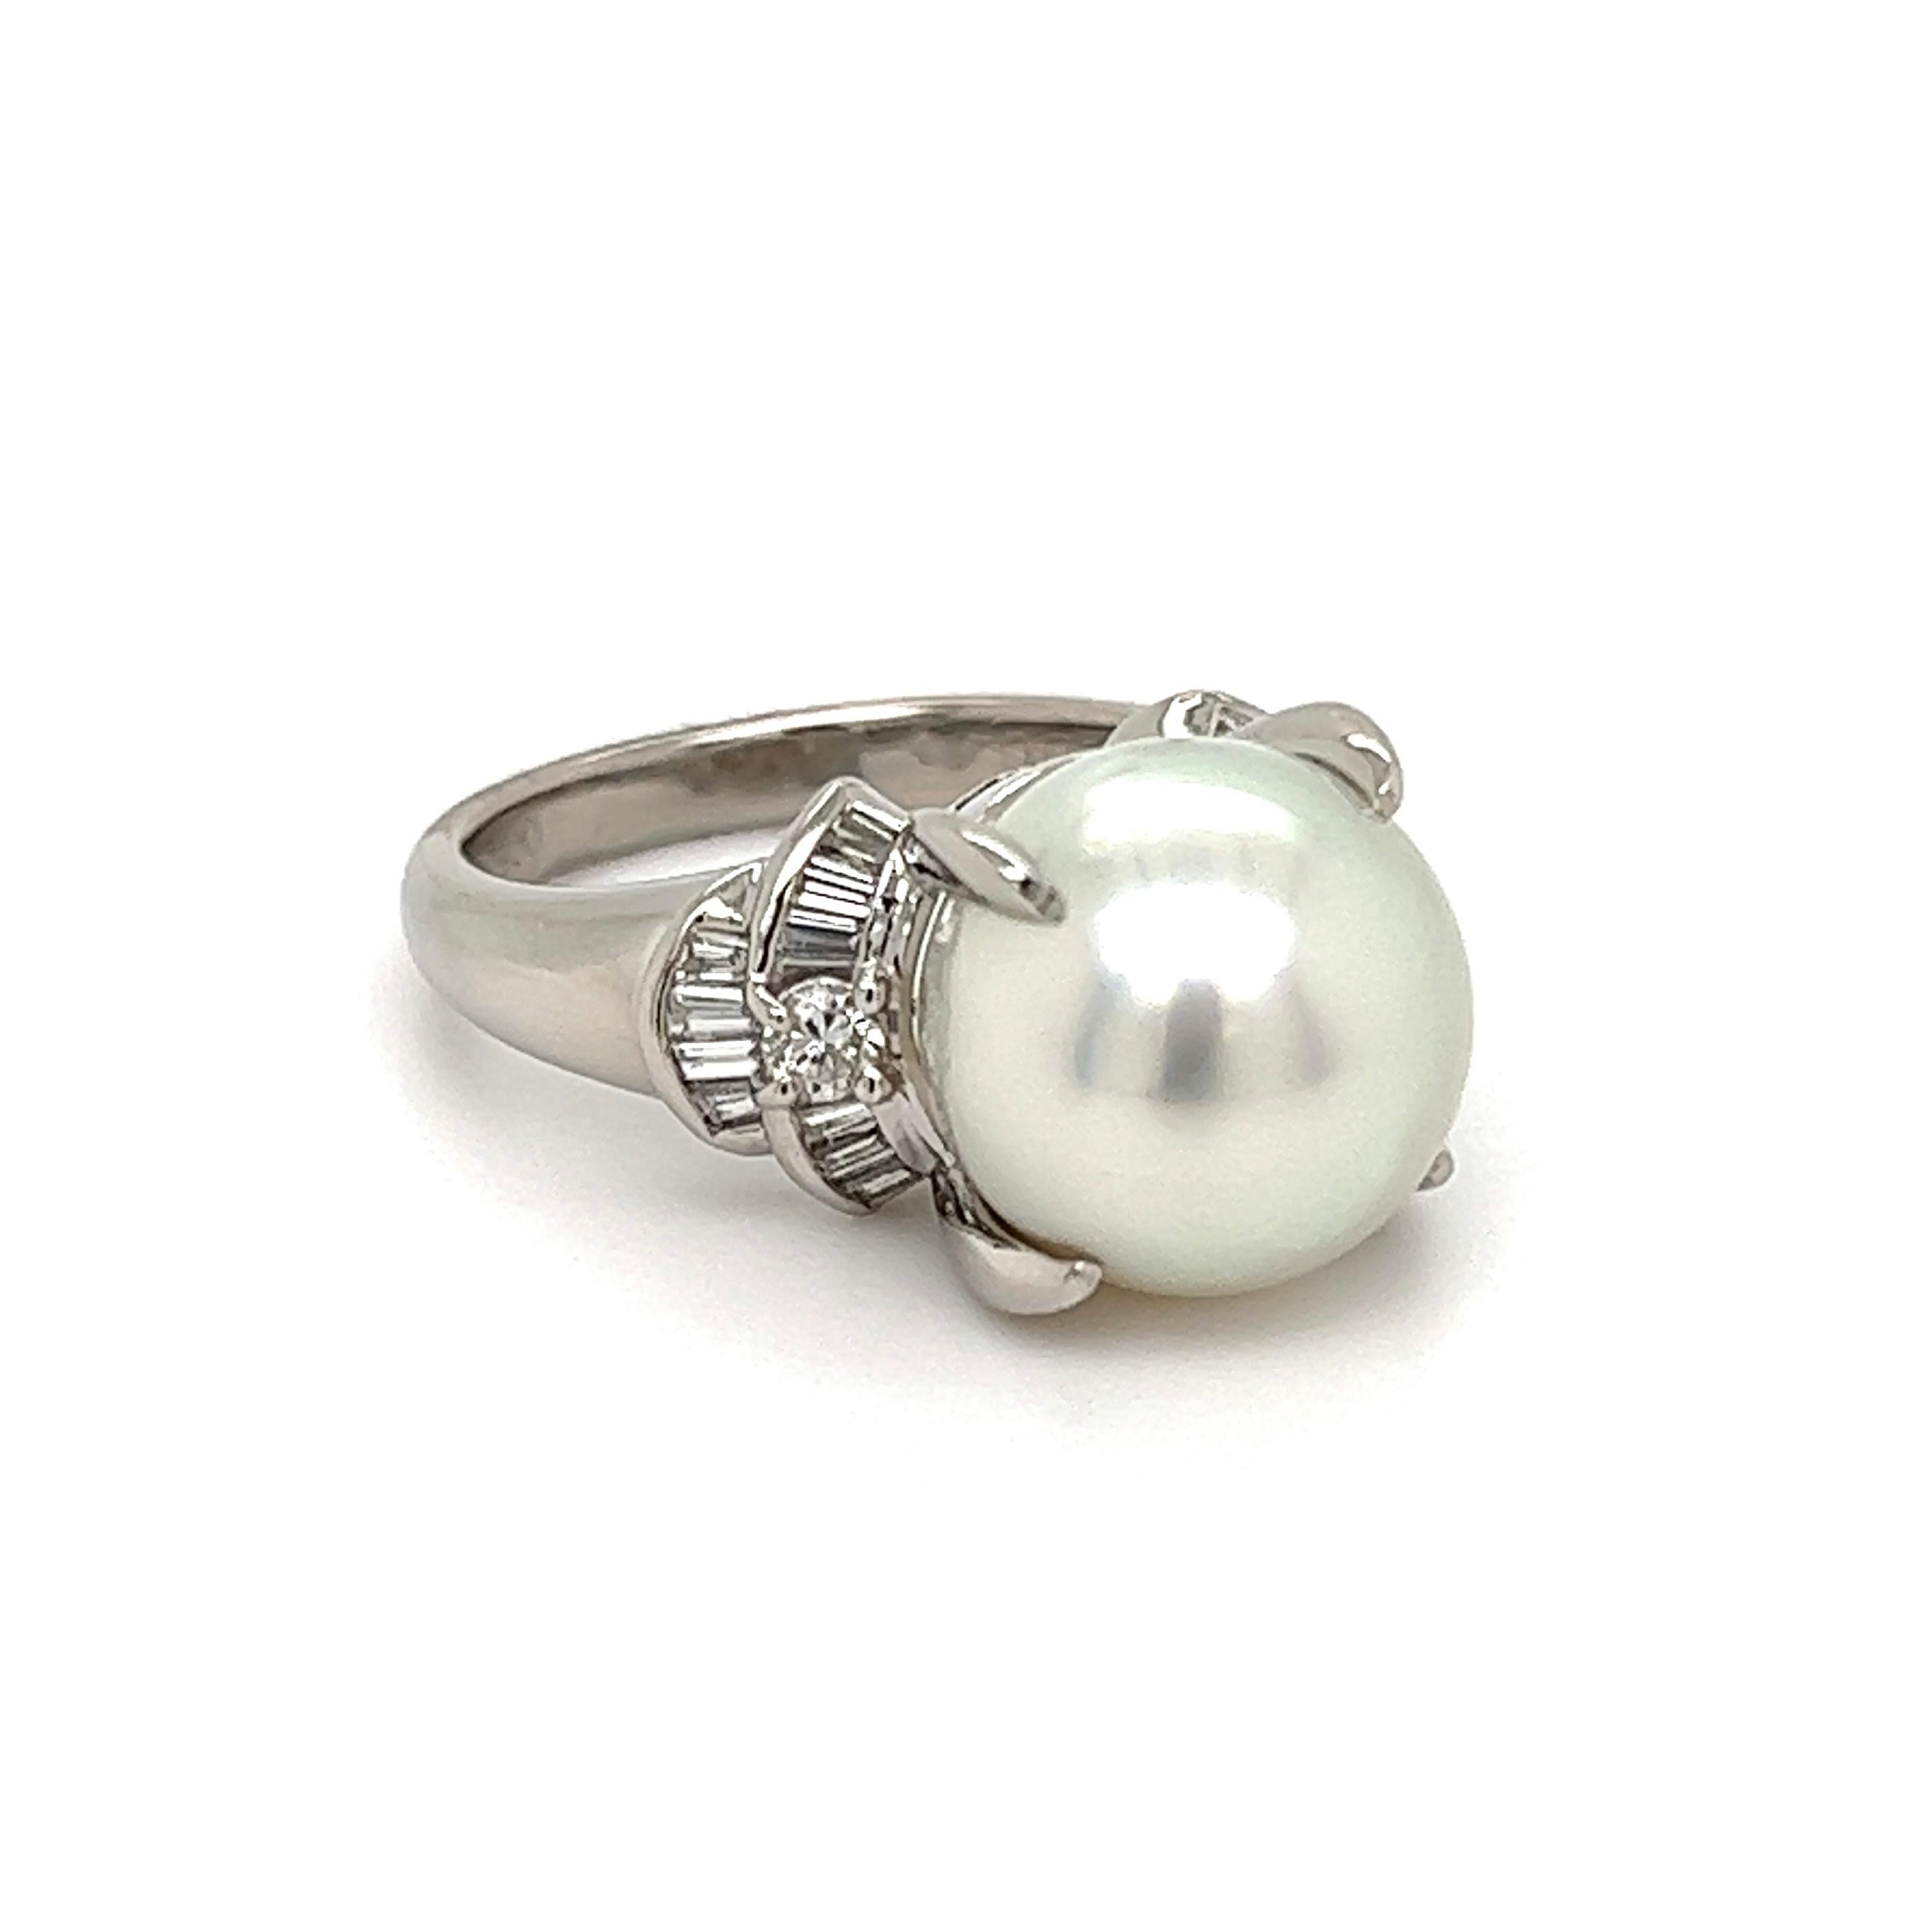 Simply Beautiful! Finely detailed South Sea Pearl and Diamond Cocktail Ring. Center securely nestled with a Hand set 11.2mm South Sea Pearl, either side Hand set with baguette and round Diamonds, weighing approx. 0.43 total carat weight. H color,